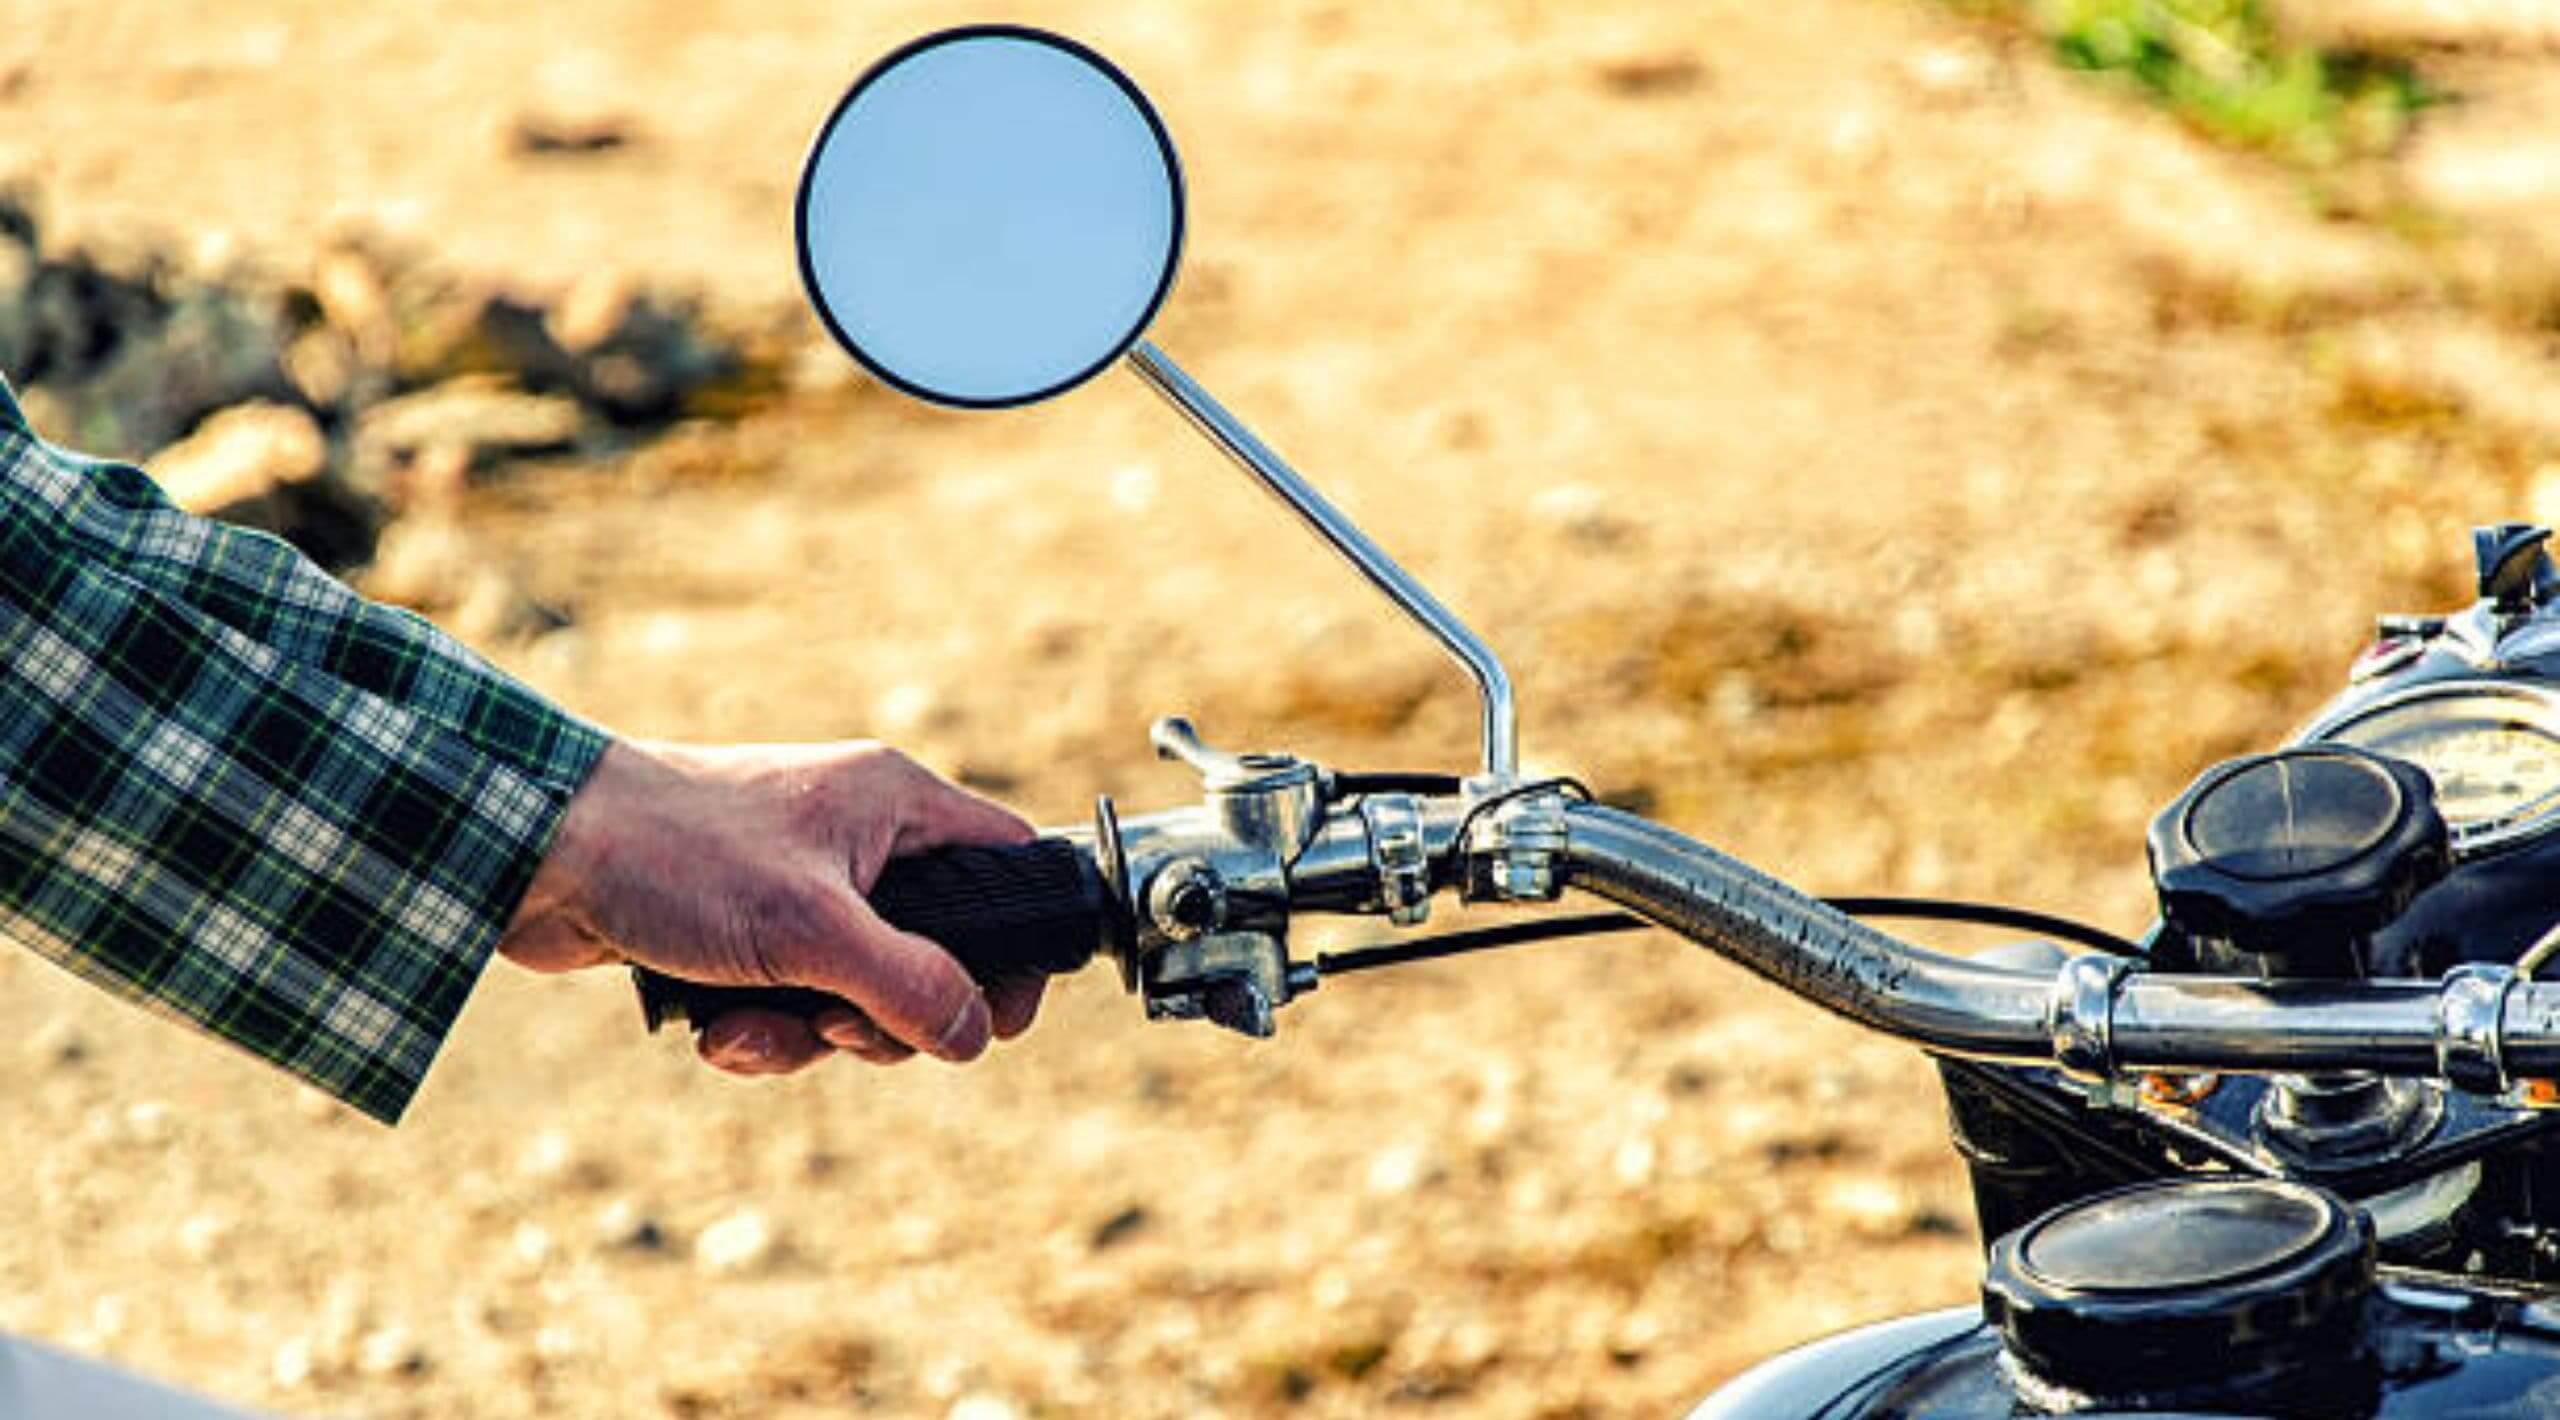 Step by Step Guide How to Adjust Motorcycle Mirrors Properly